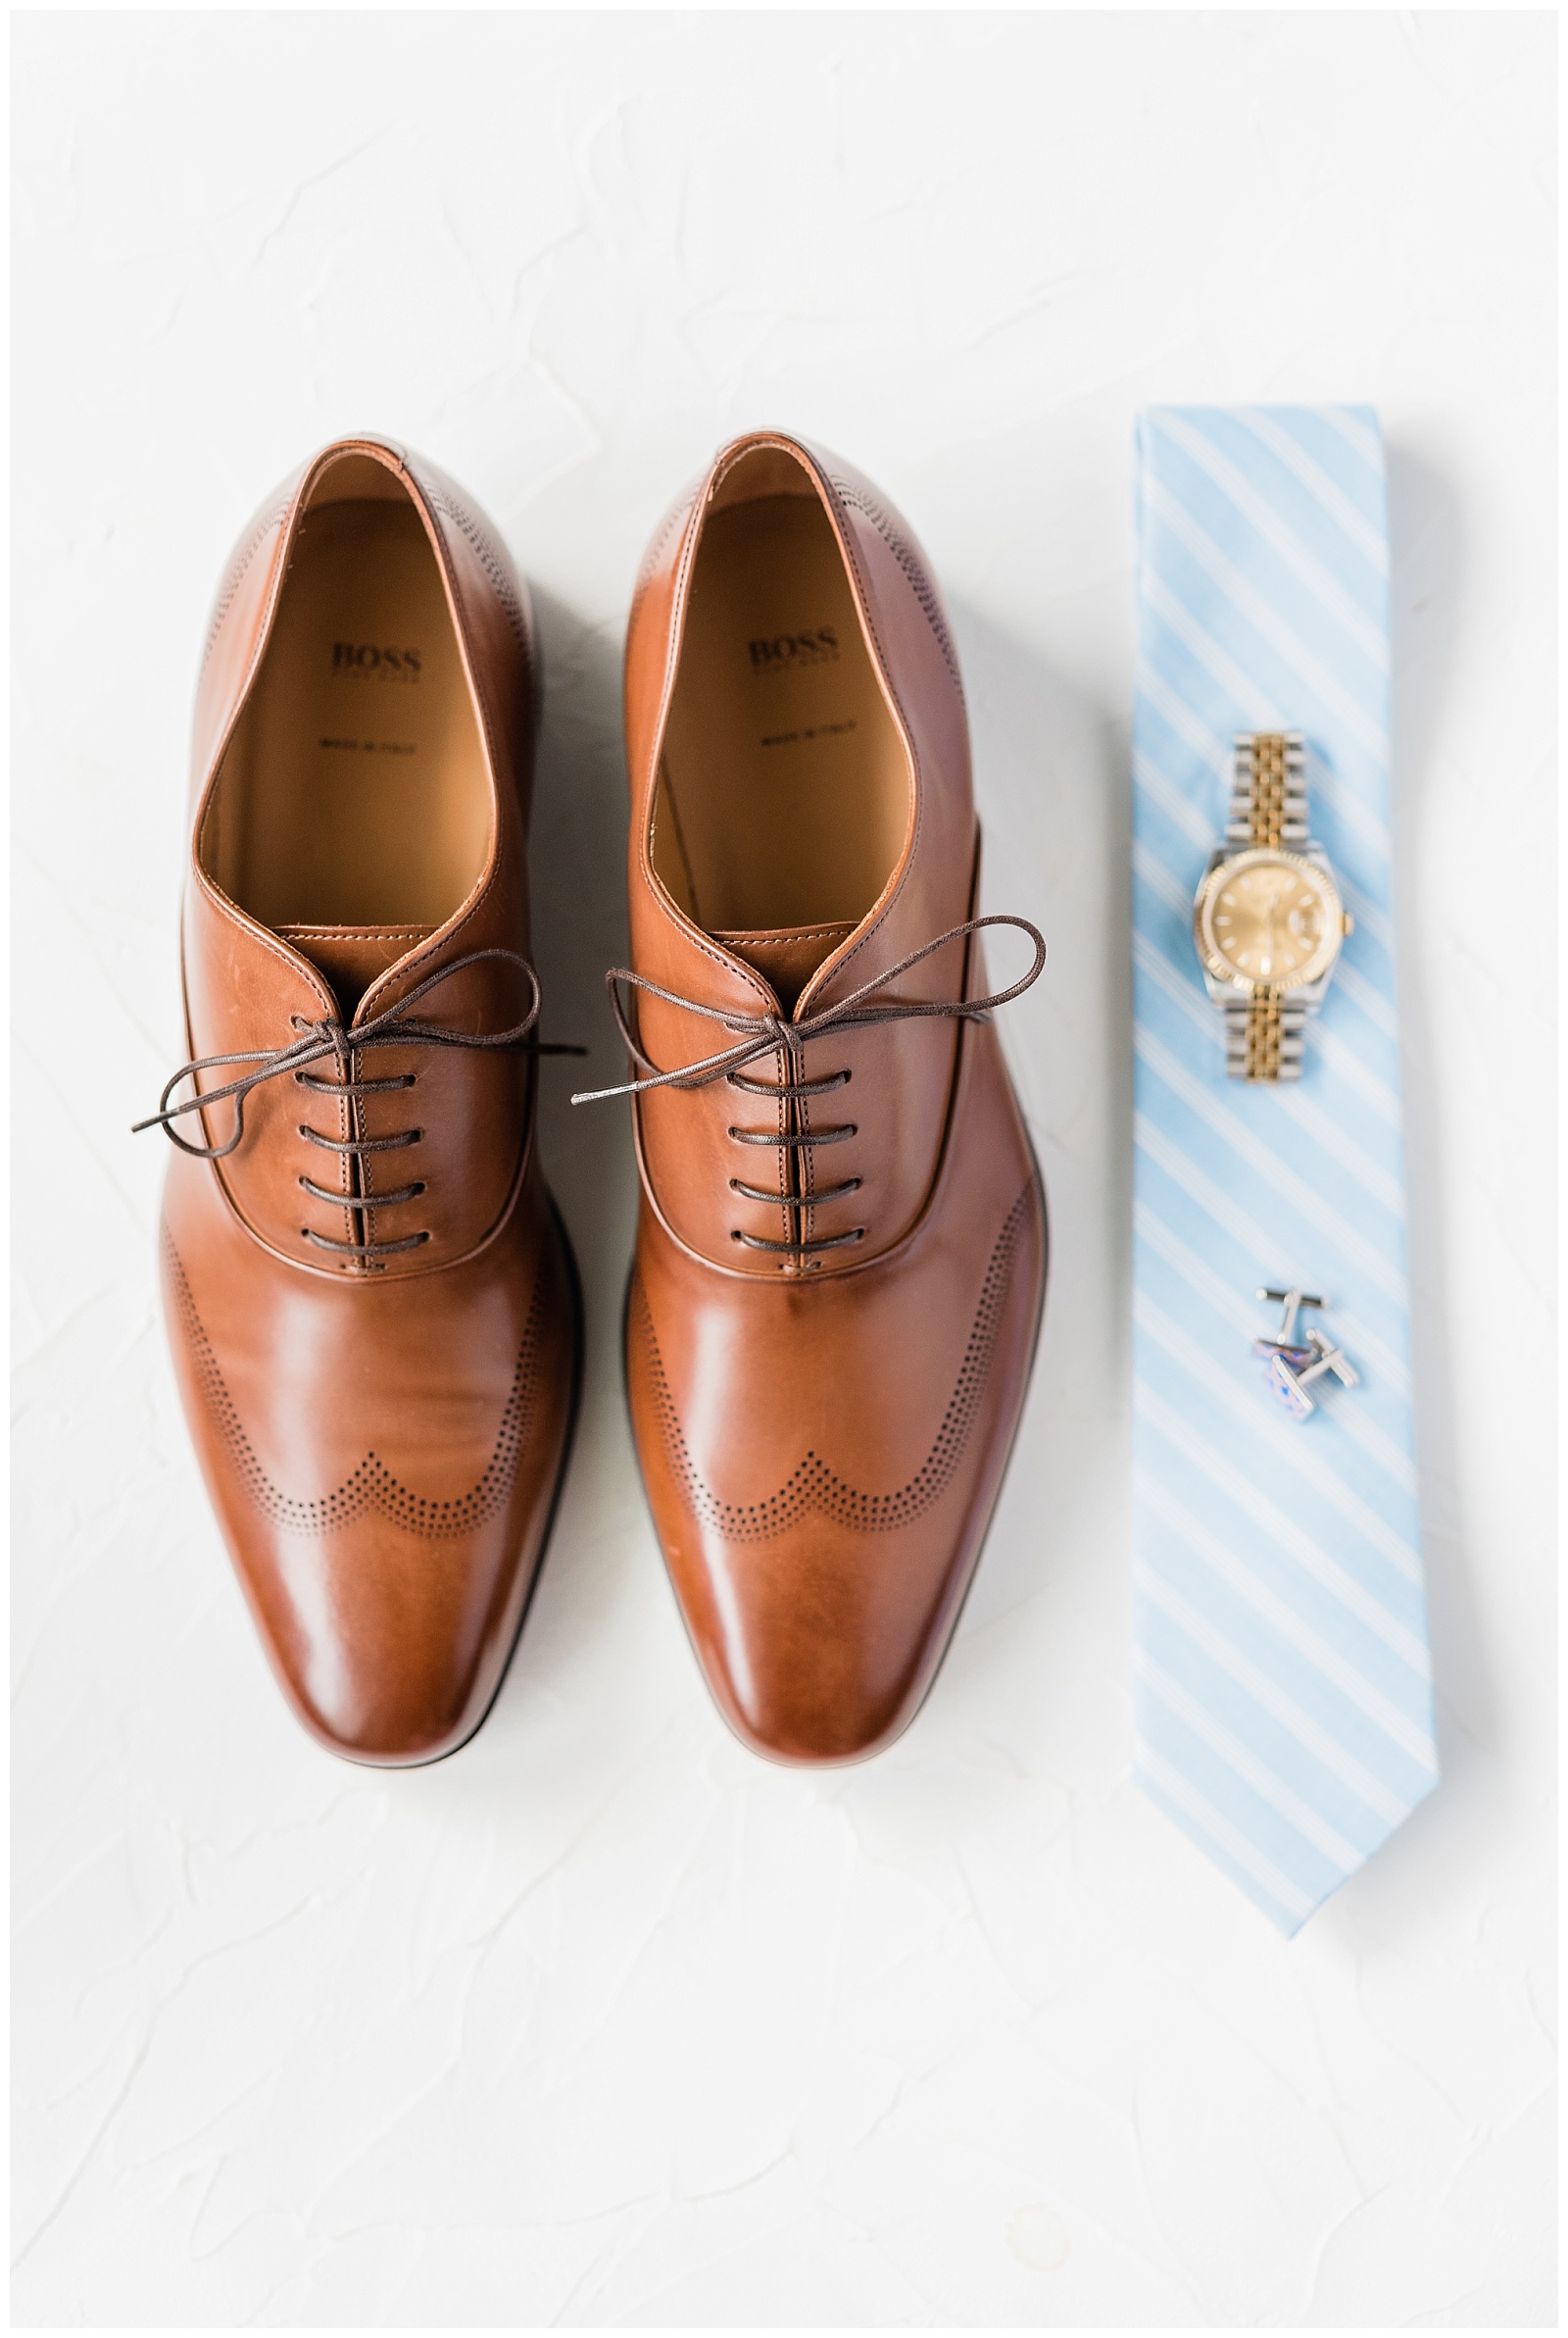 Groom's brown wedding shoes styled with his light blue striped tie, gold watch, and cufflinks.